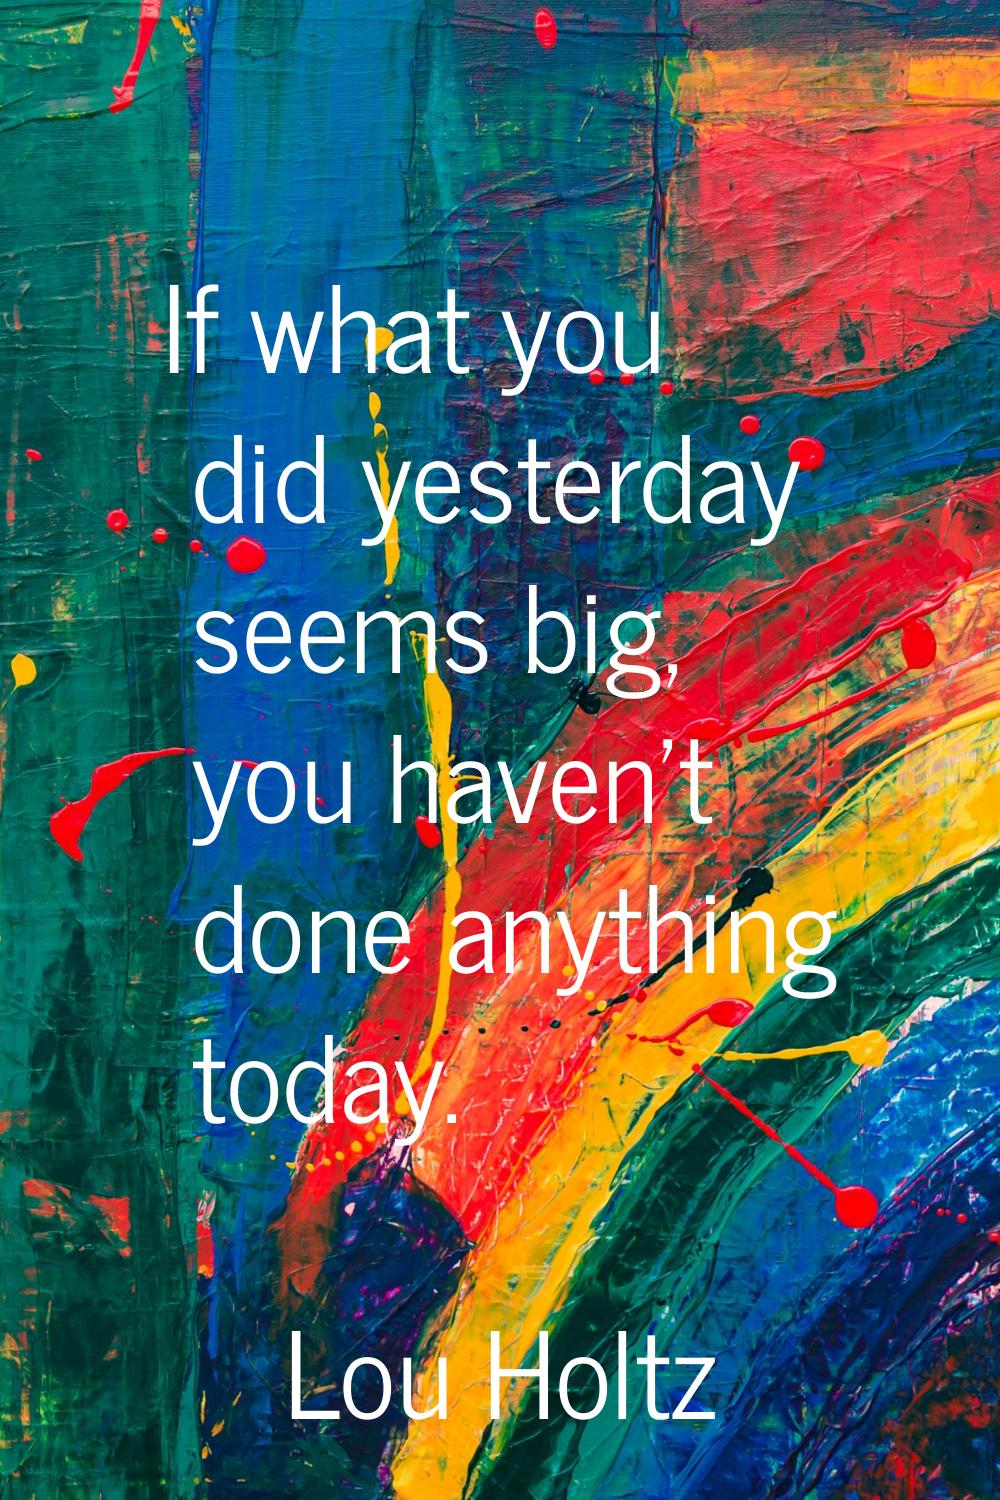 If what you did yesterday seems big, you haven't done anything today.